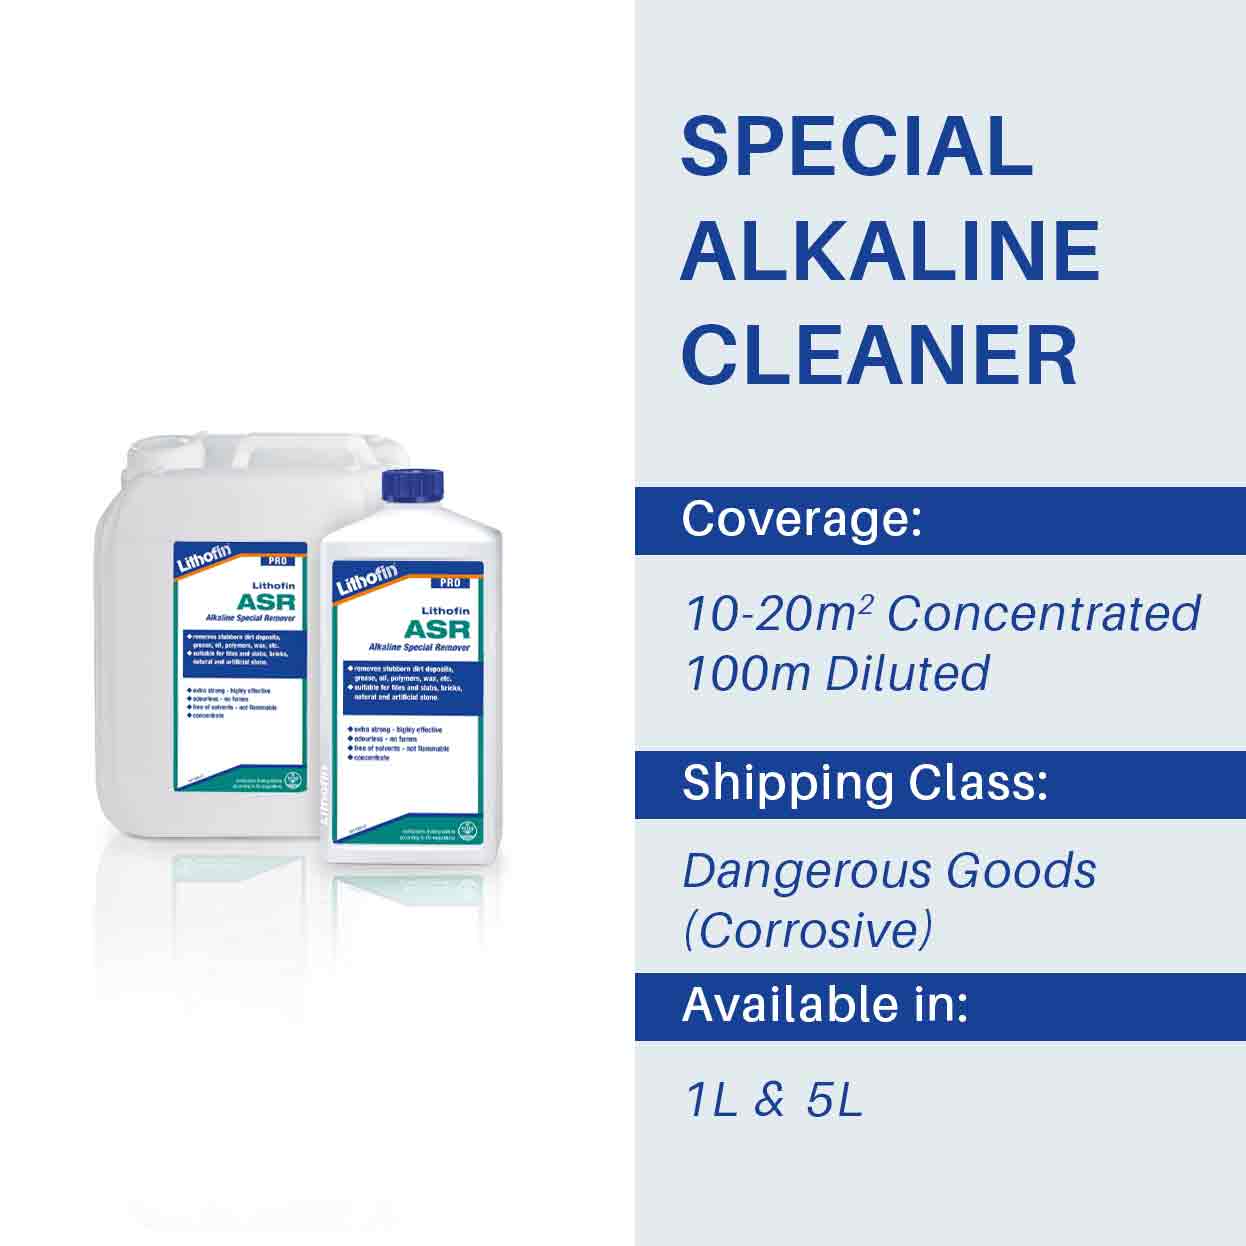 Lithofin ASR - Stone Doctor Australia - Speciality Cleaning > Alkaline > Troubleshooting